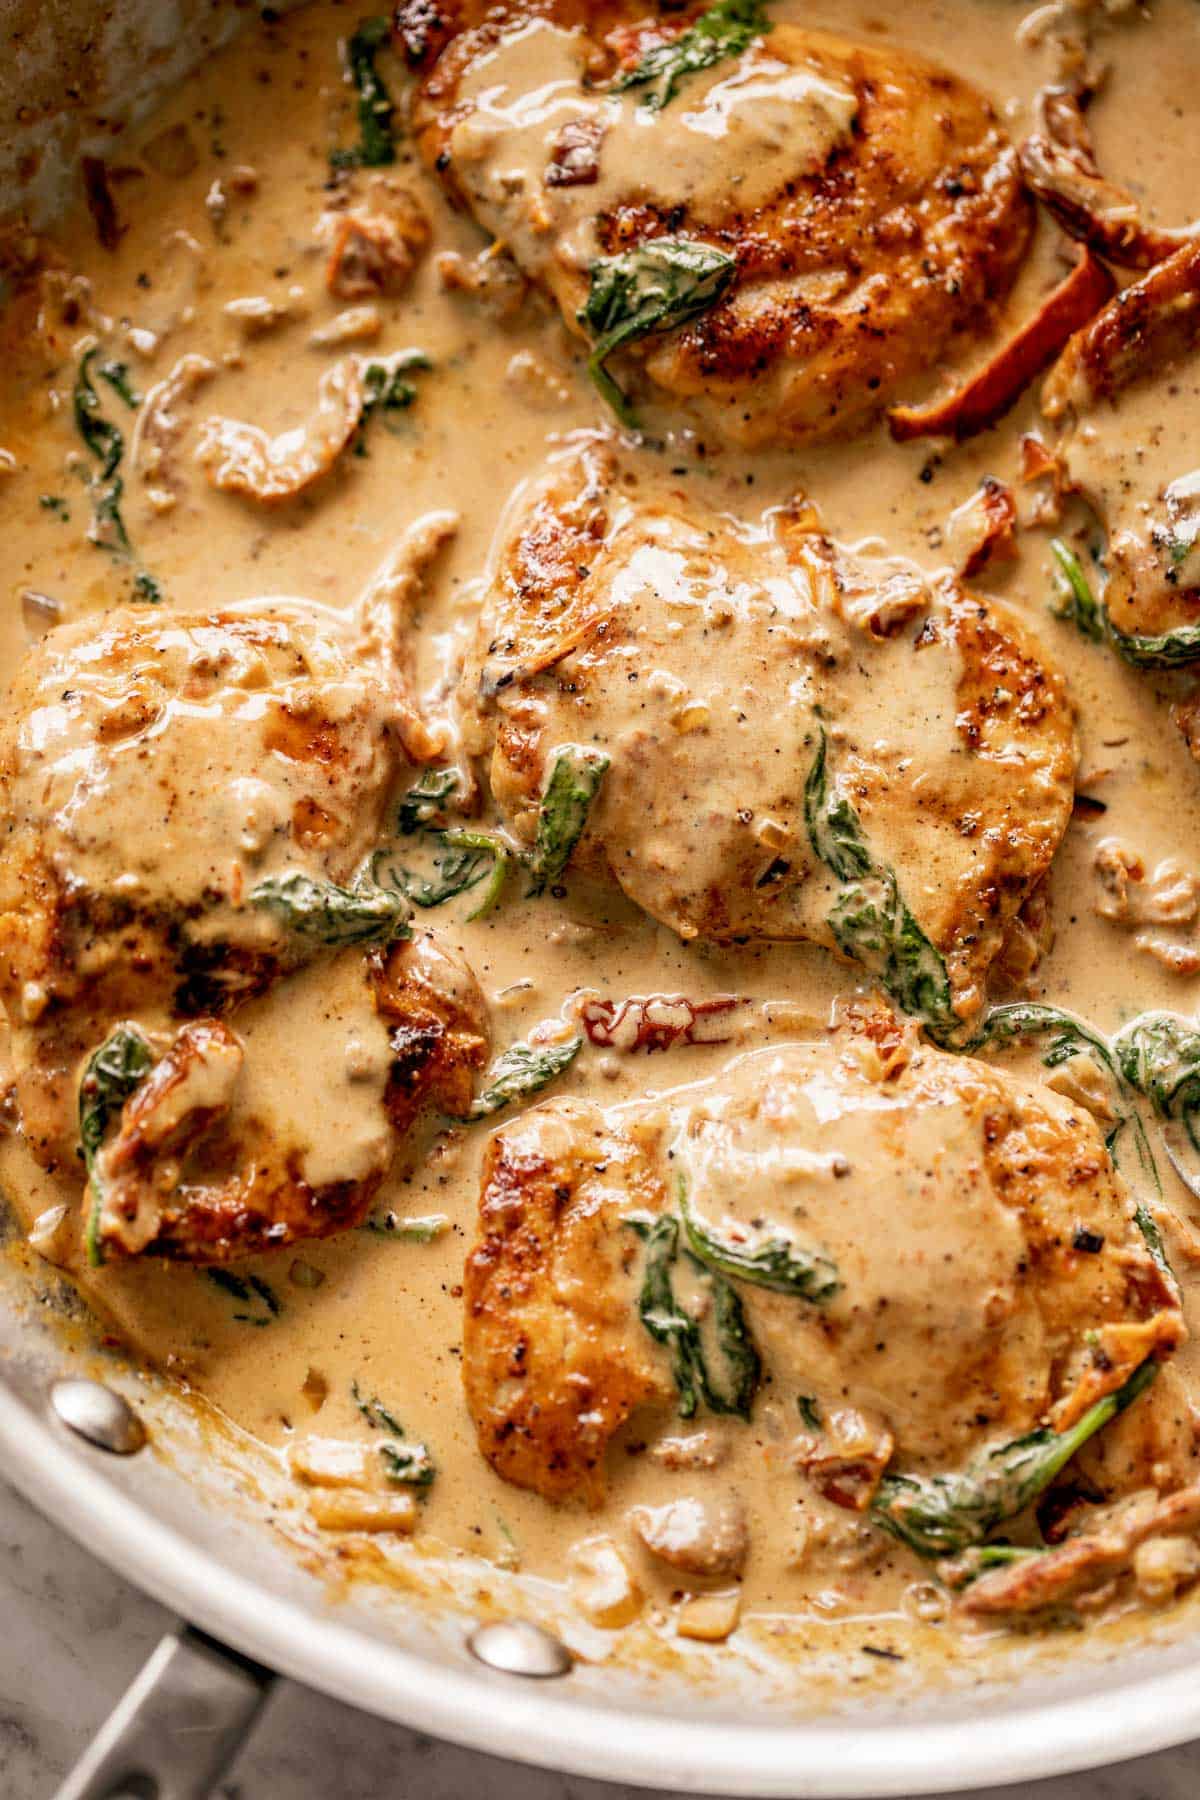 Creamy Sun Dried Tomato Chicken Thighs in a. silver pan or skillet.